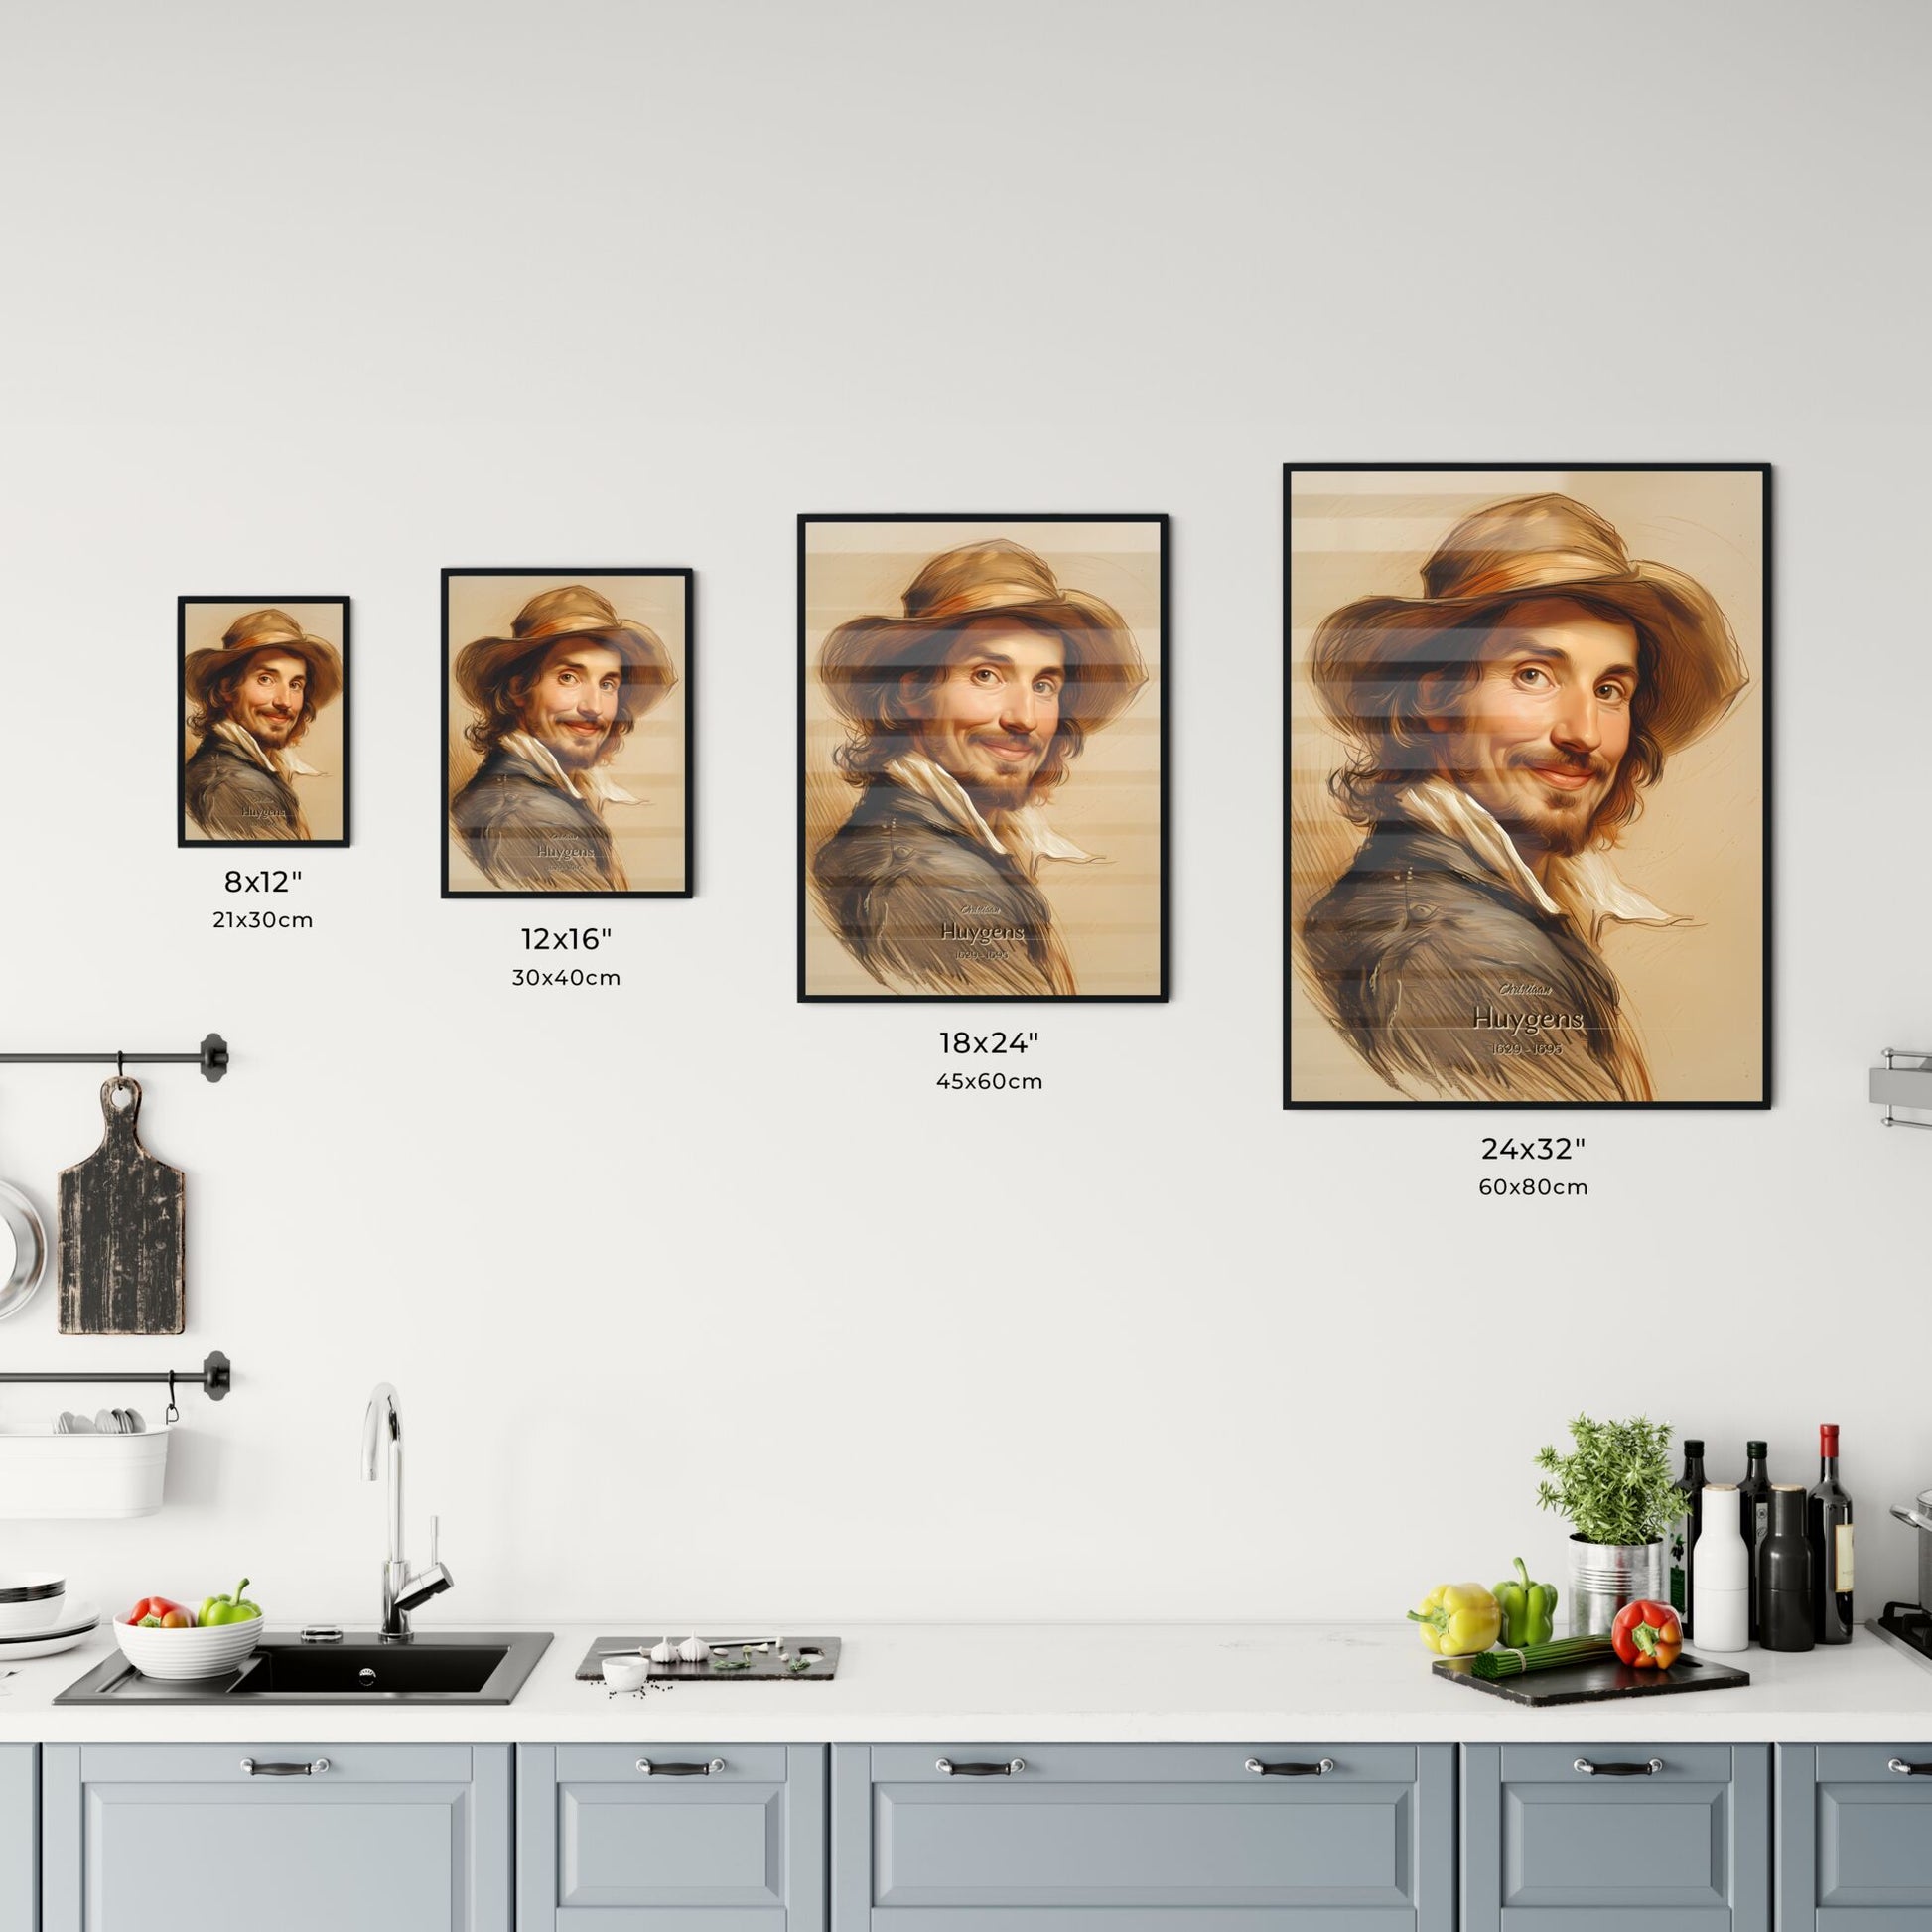 Christiaan, Huygens, 1629 - 1695, A Poster of a man wearing a hat Default Title